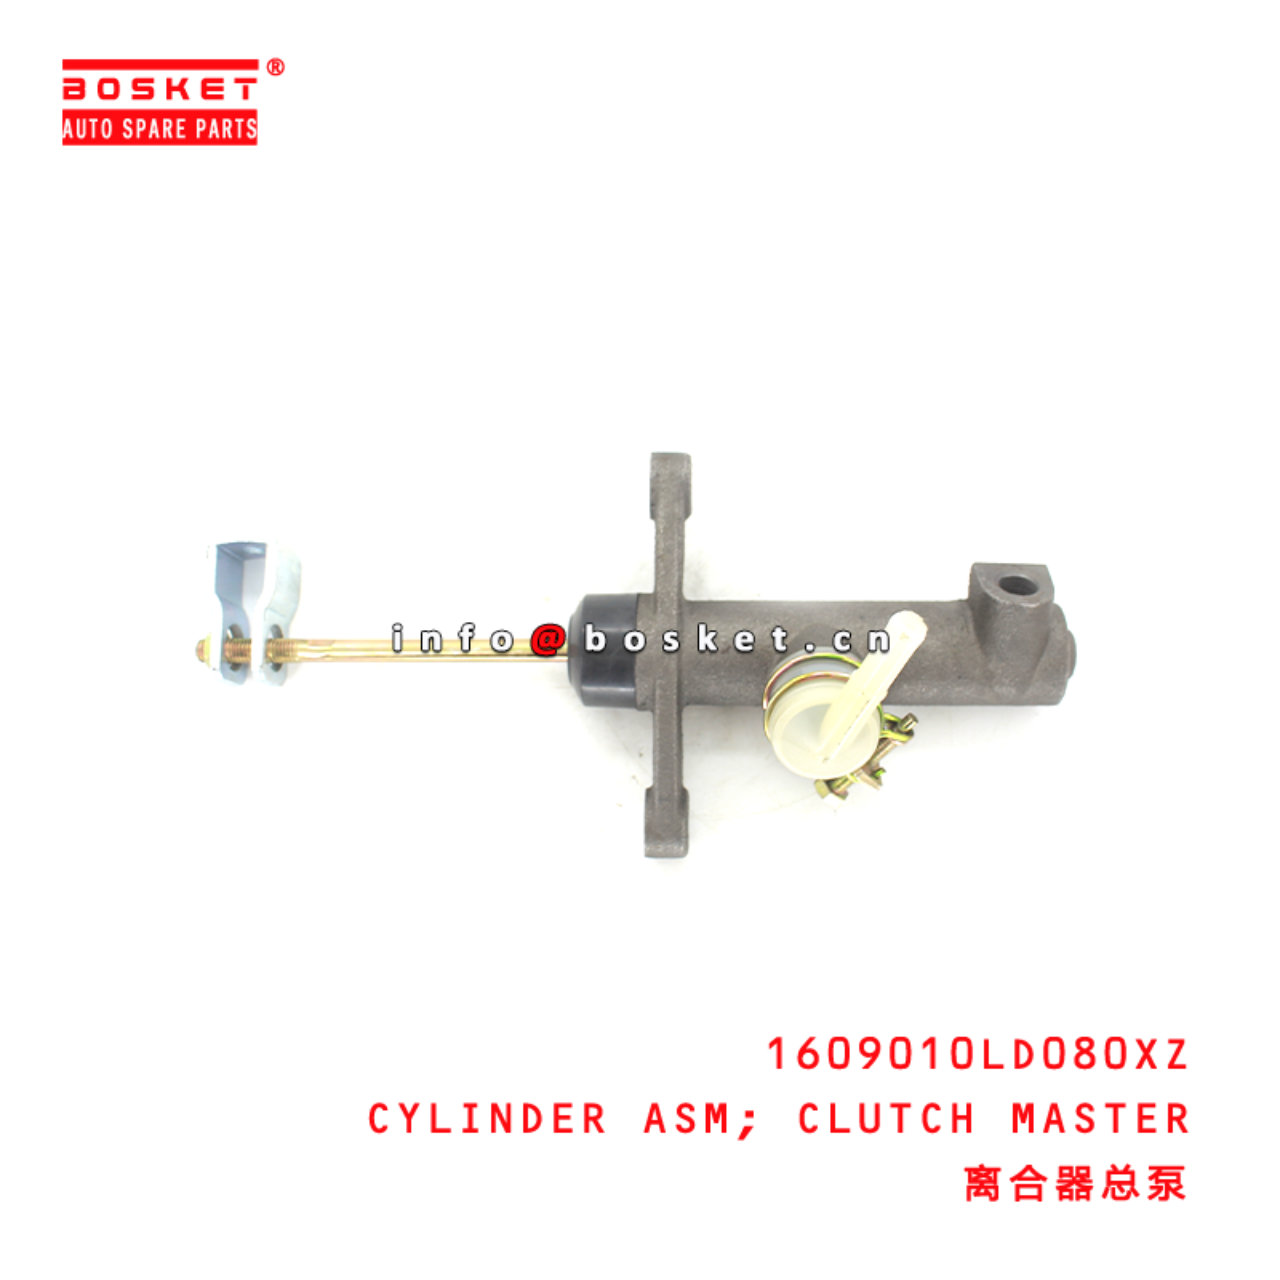 1609010LD080XZ Clutch Master Cylinder Assembly Suitable for ISUZU  N56